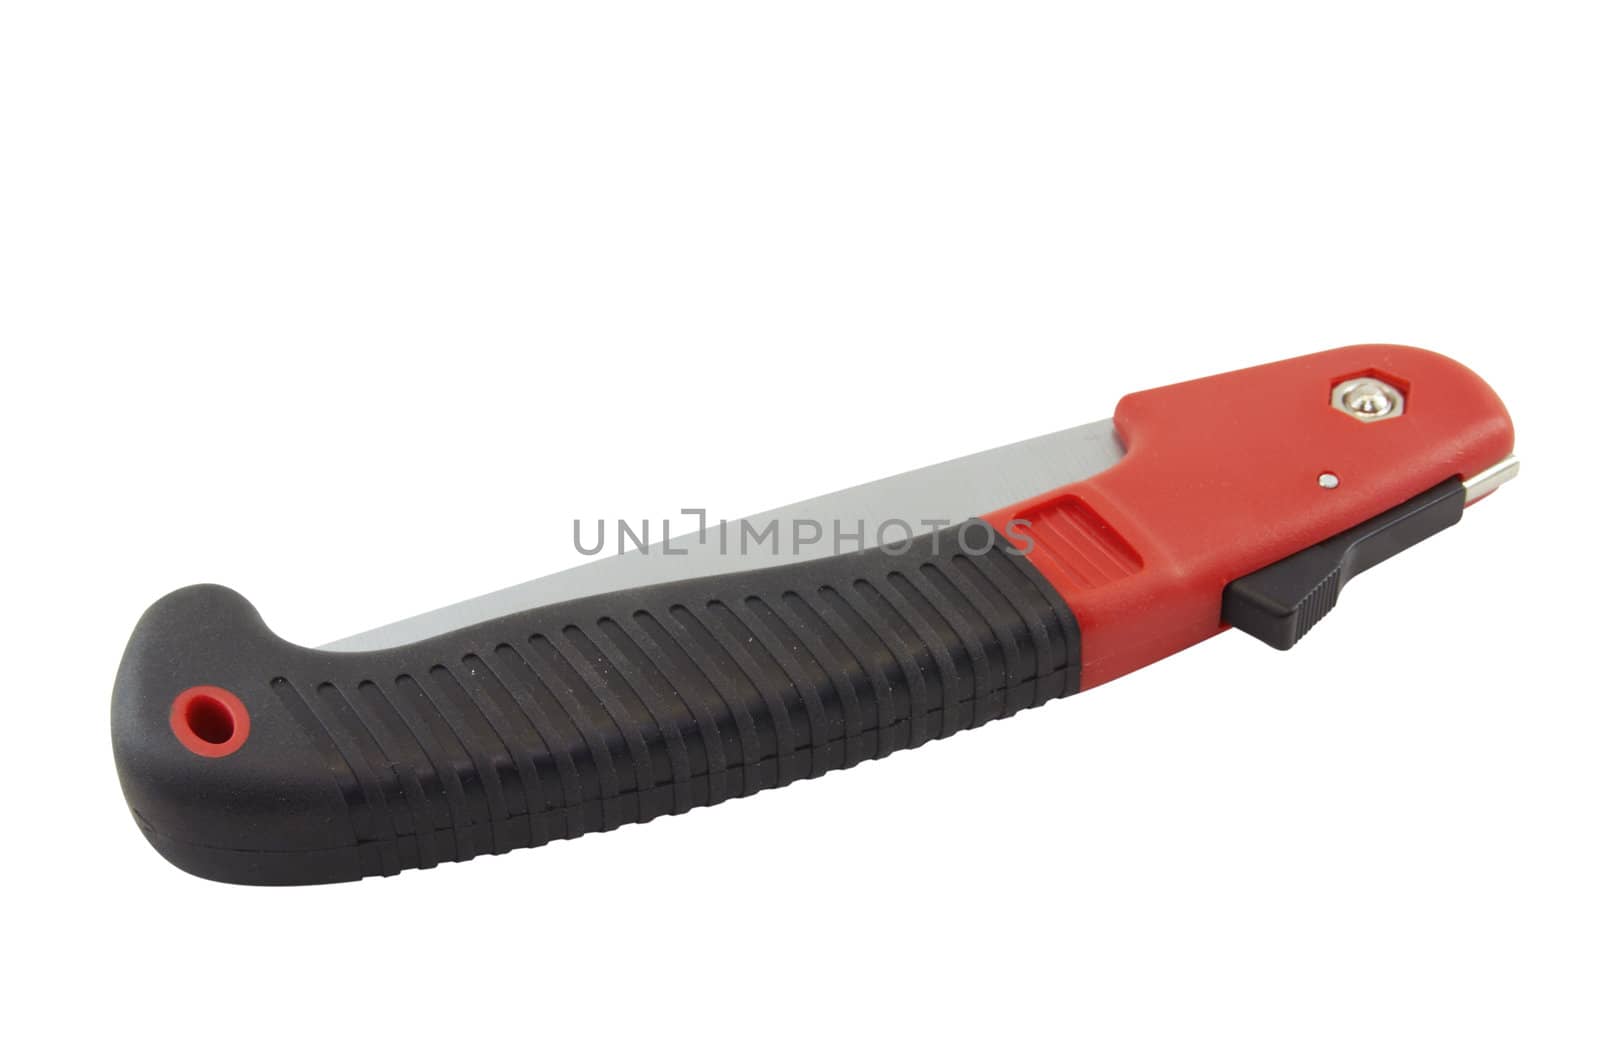 Collapsible saw by Dominator